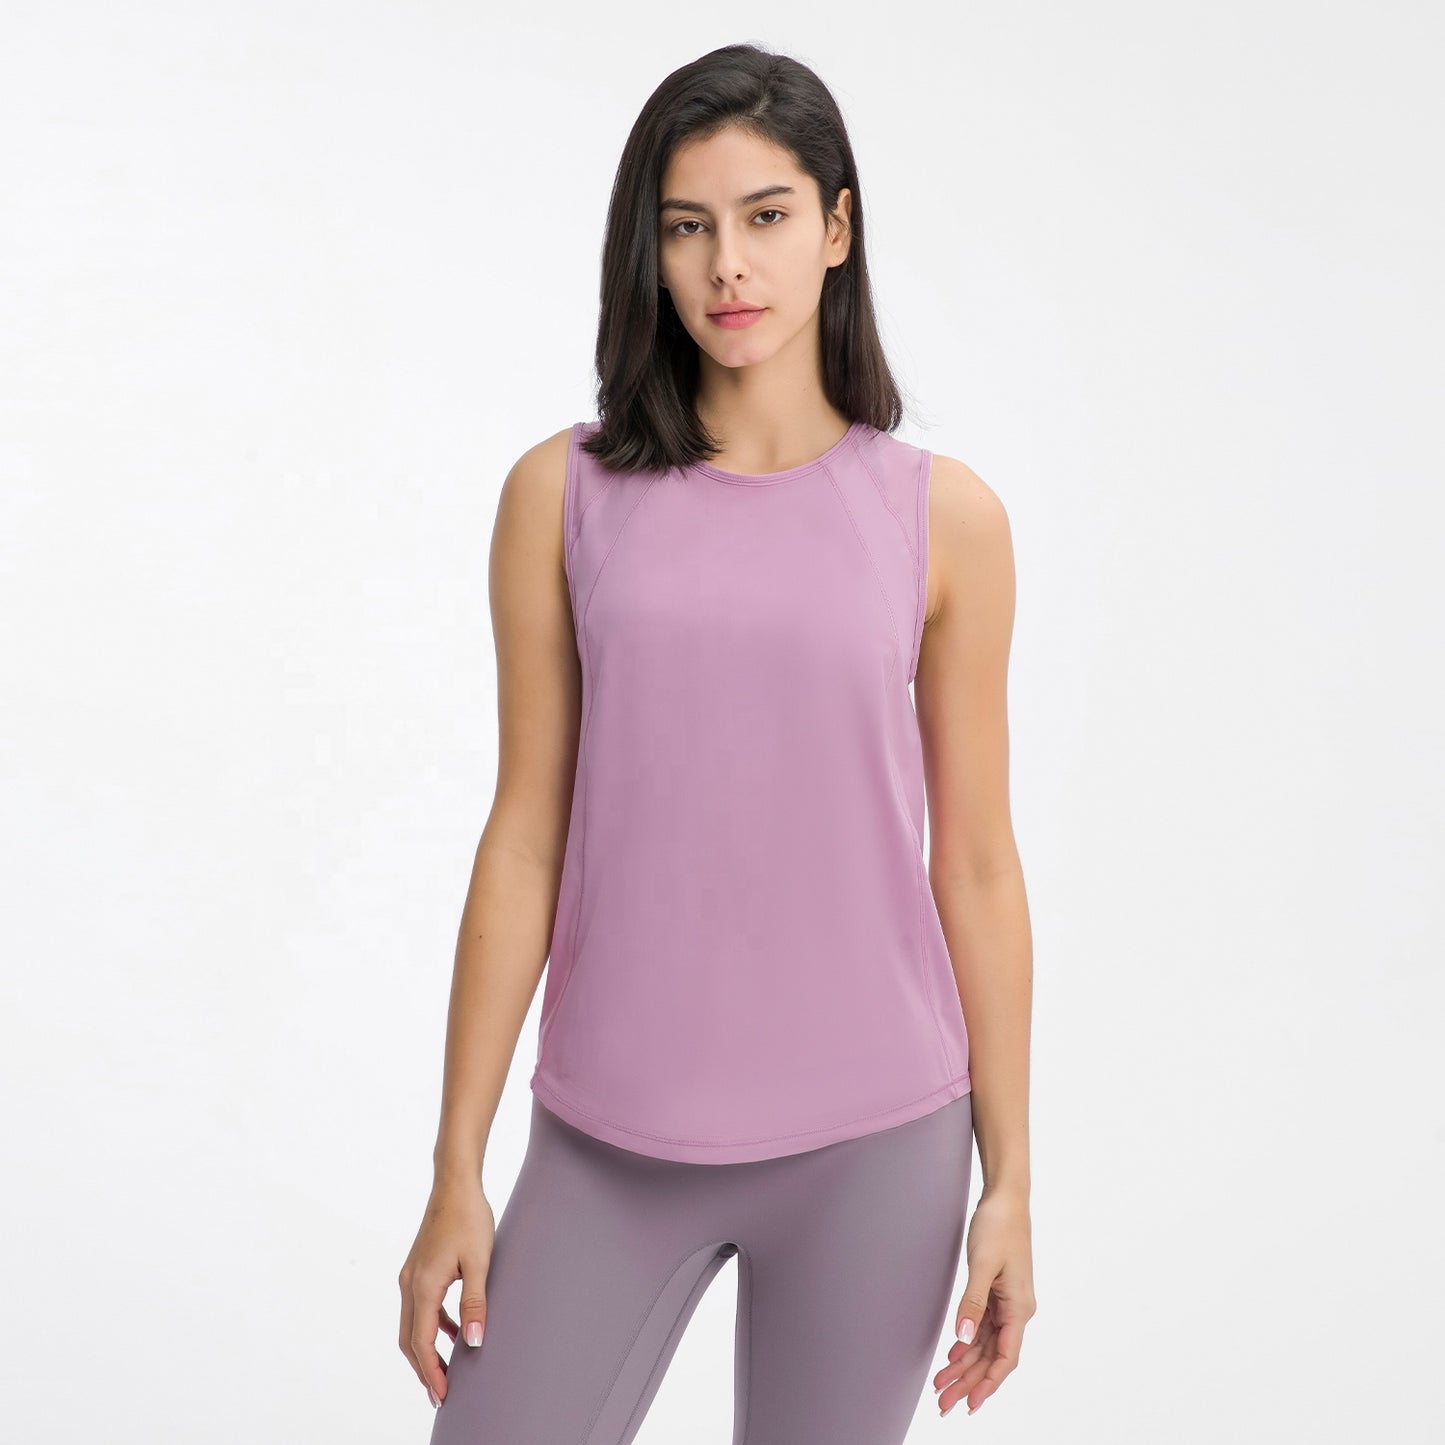 Women's Sports Vests & Yoga Tank Tops - Hollow Mesh Out Back. This super comfortable tank top is made from nylon and spandex breathable materials that are durable, quick-dry and have great stretchable abilities giving you a comfortable and flexible feel. Its suitable for jogging, yoga, gym and is comfortable for leisure wear.